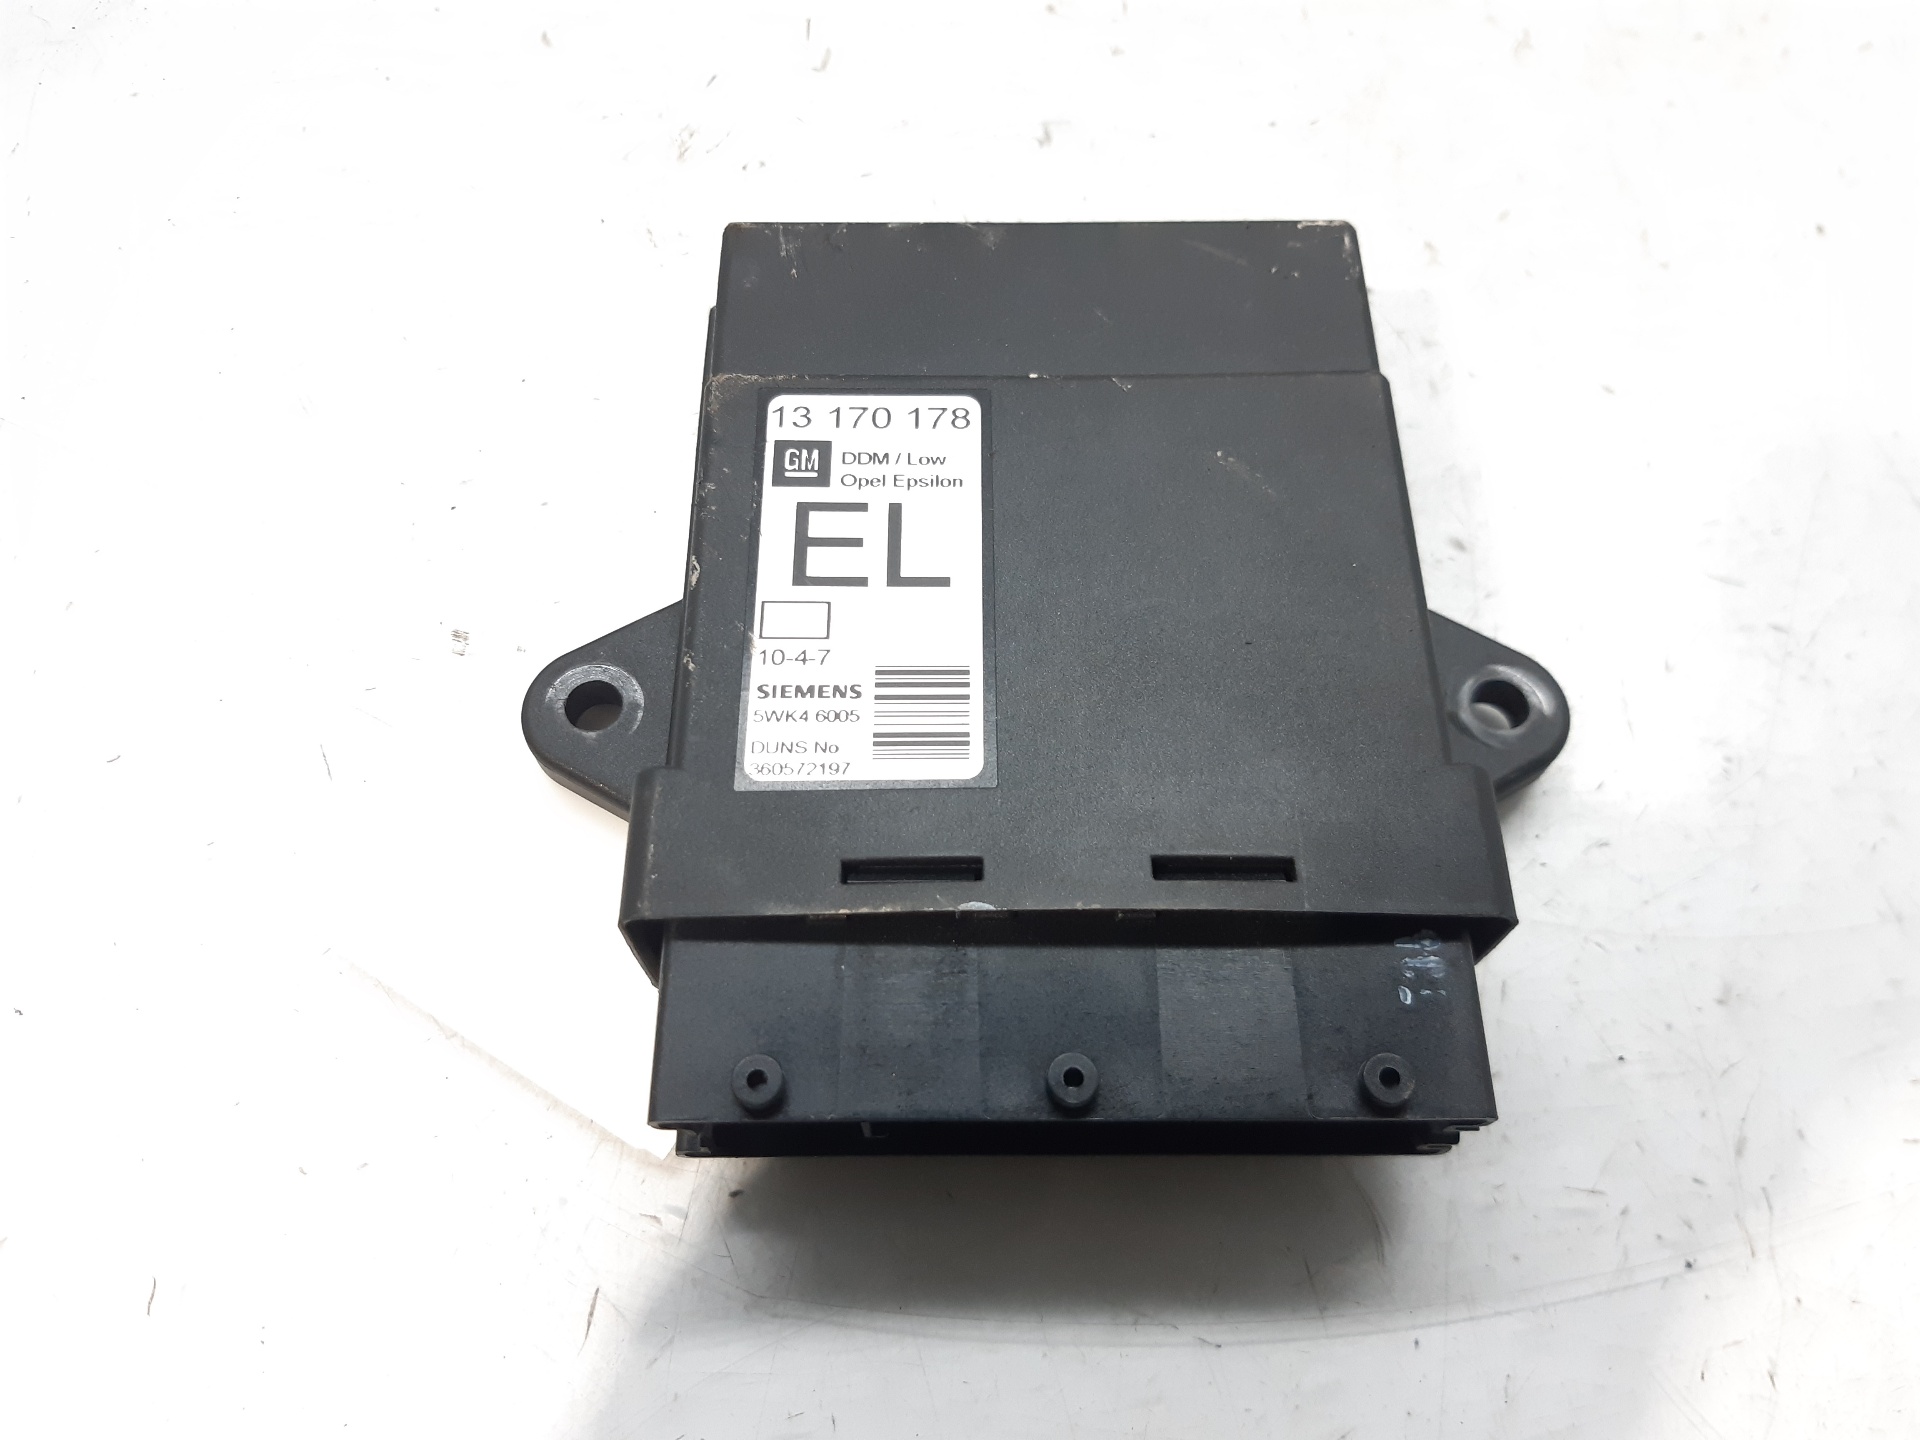 OPEL Vectra C (2002-2005) Other Control Units 13170178 18767604